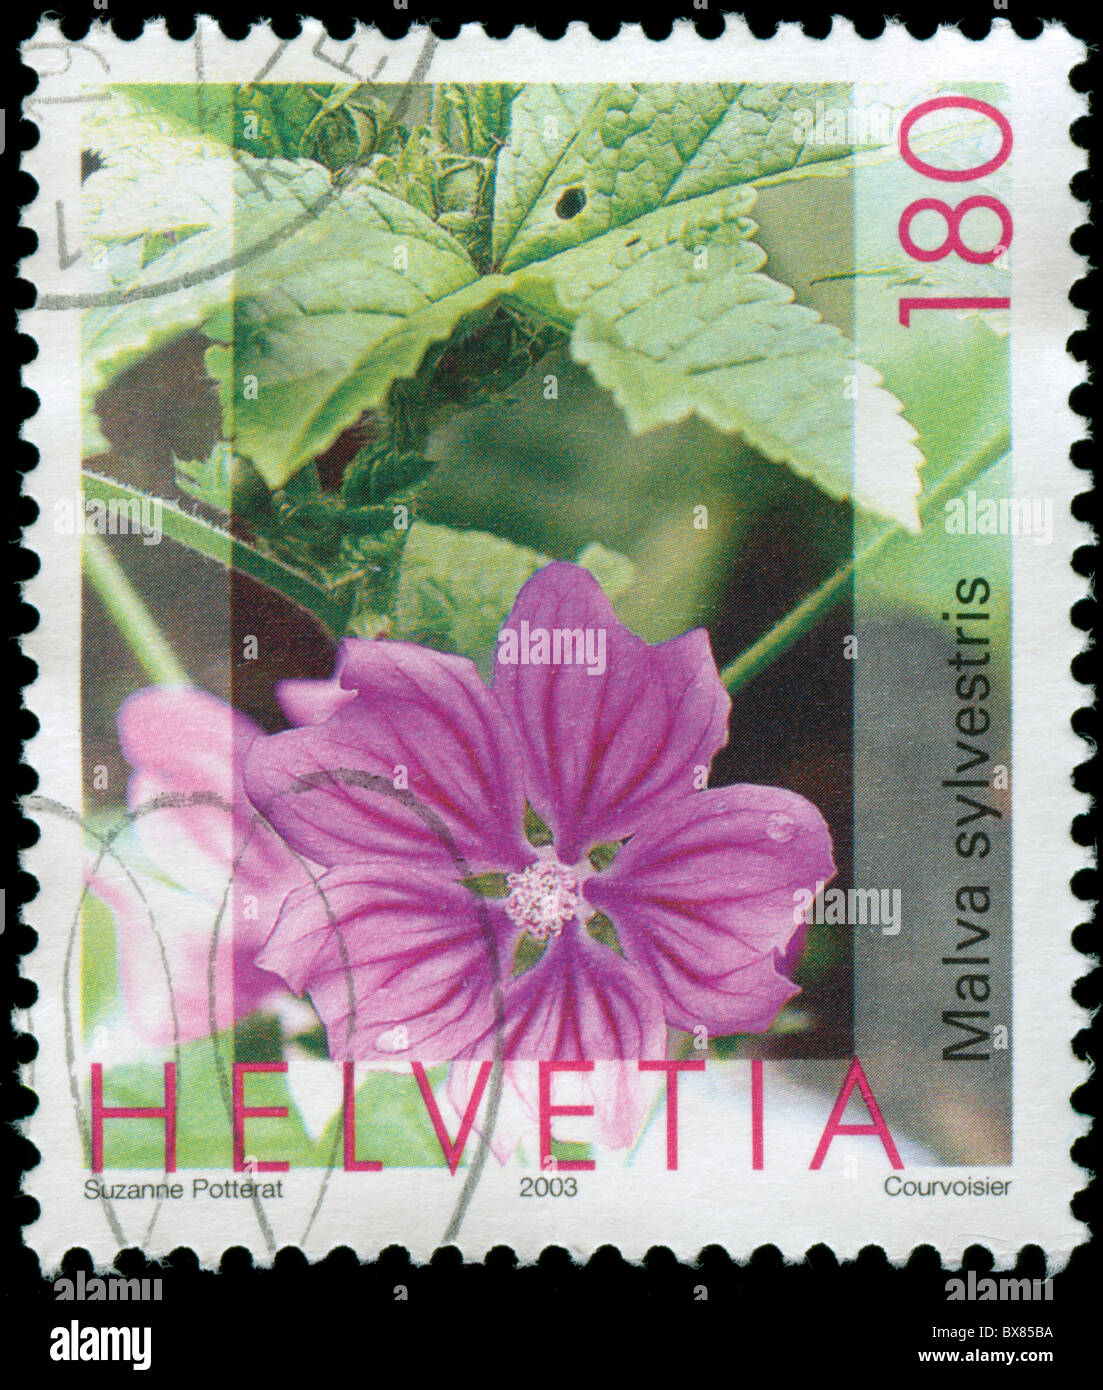 Swiss postage stamp with flower motif Stock Photo